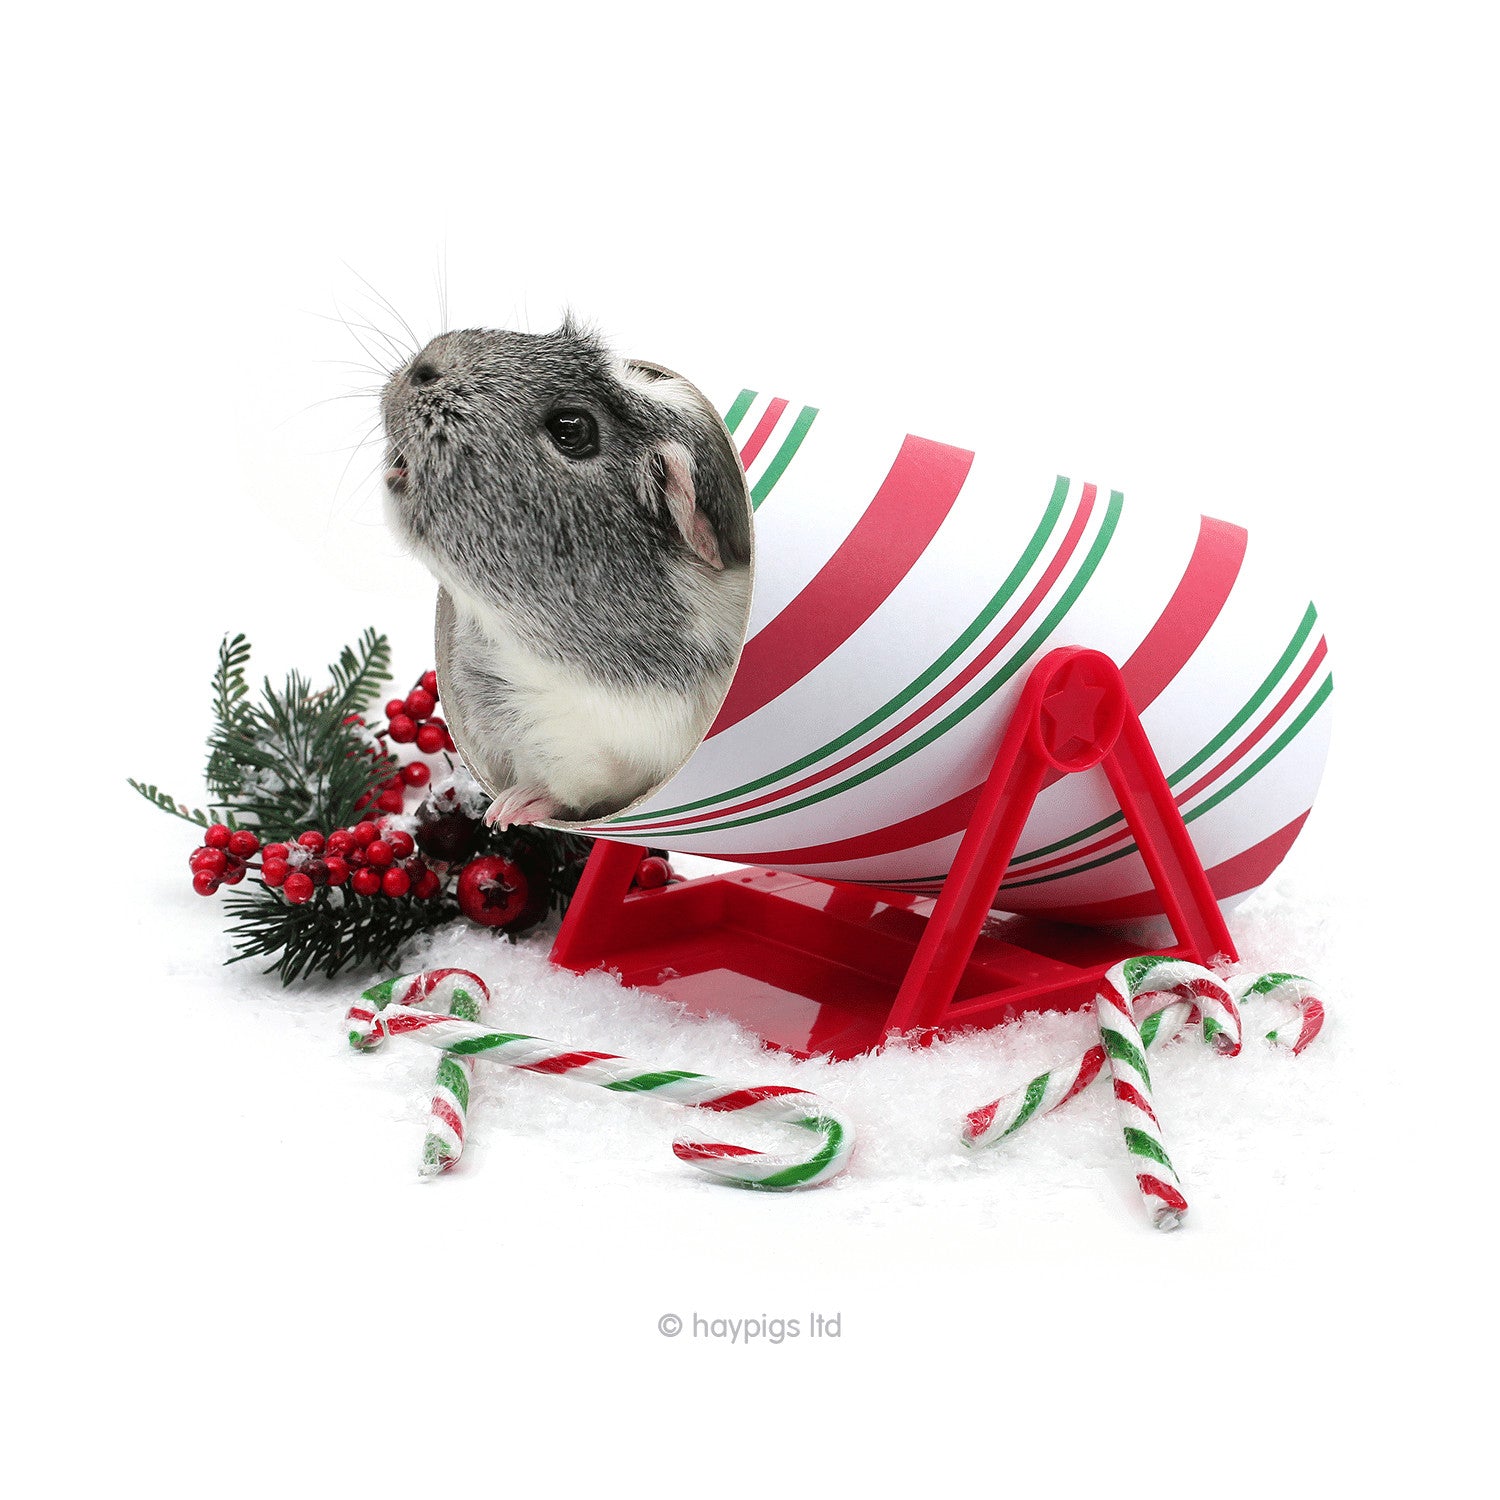 10 Christmas Gifts Your Cavy Will Love